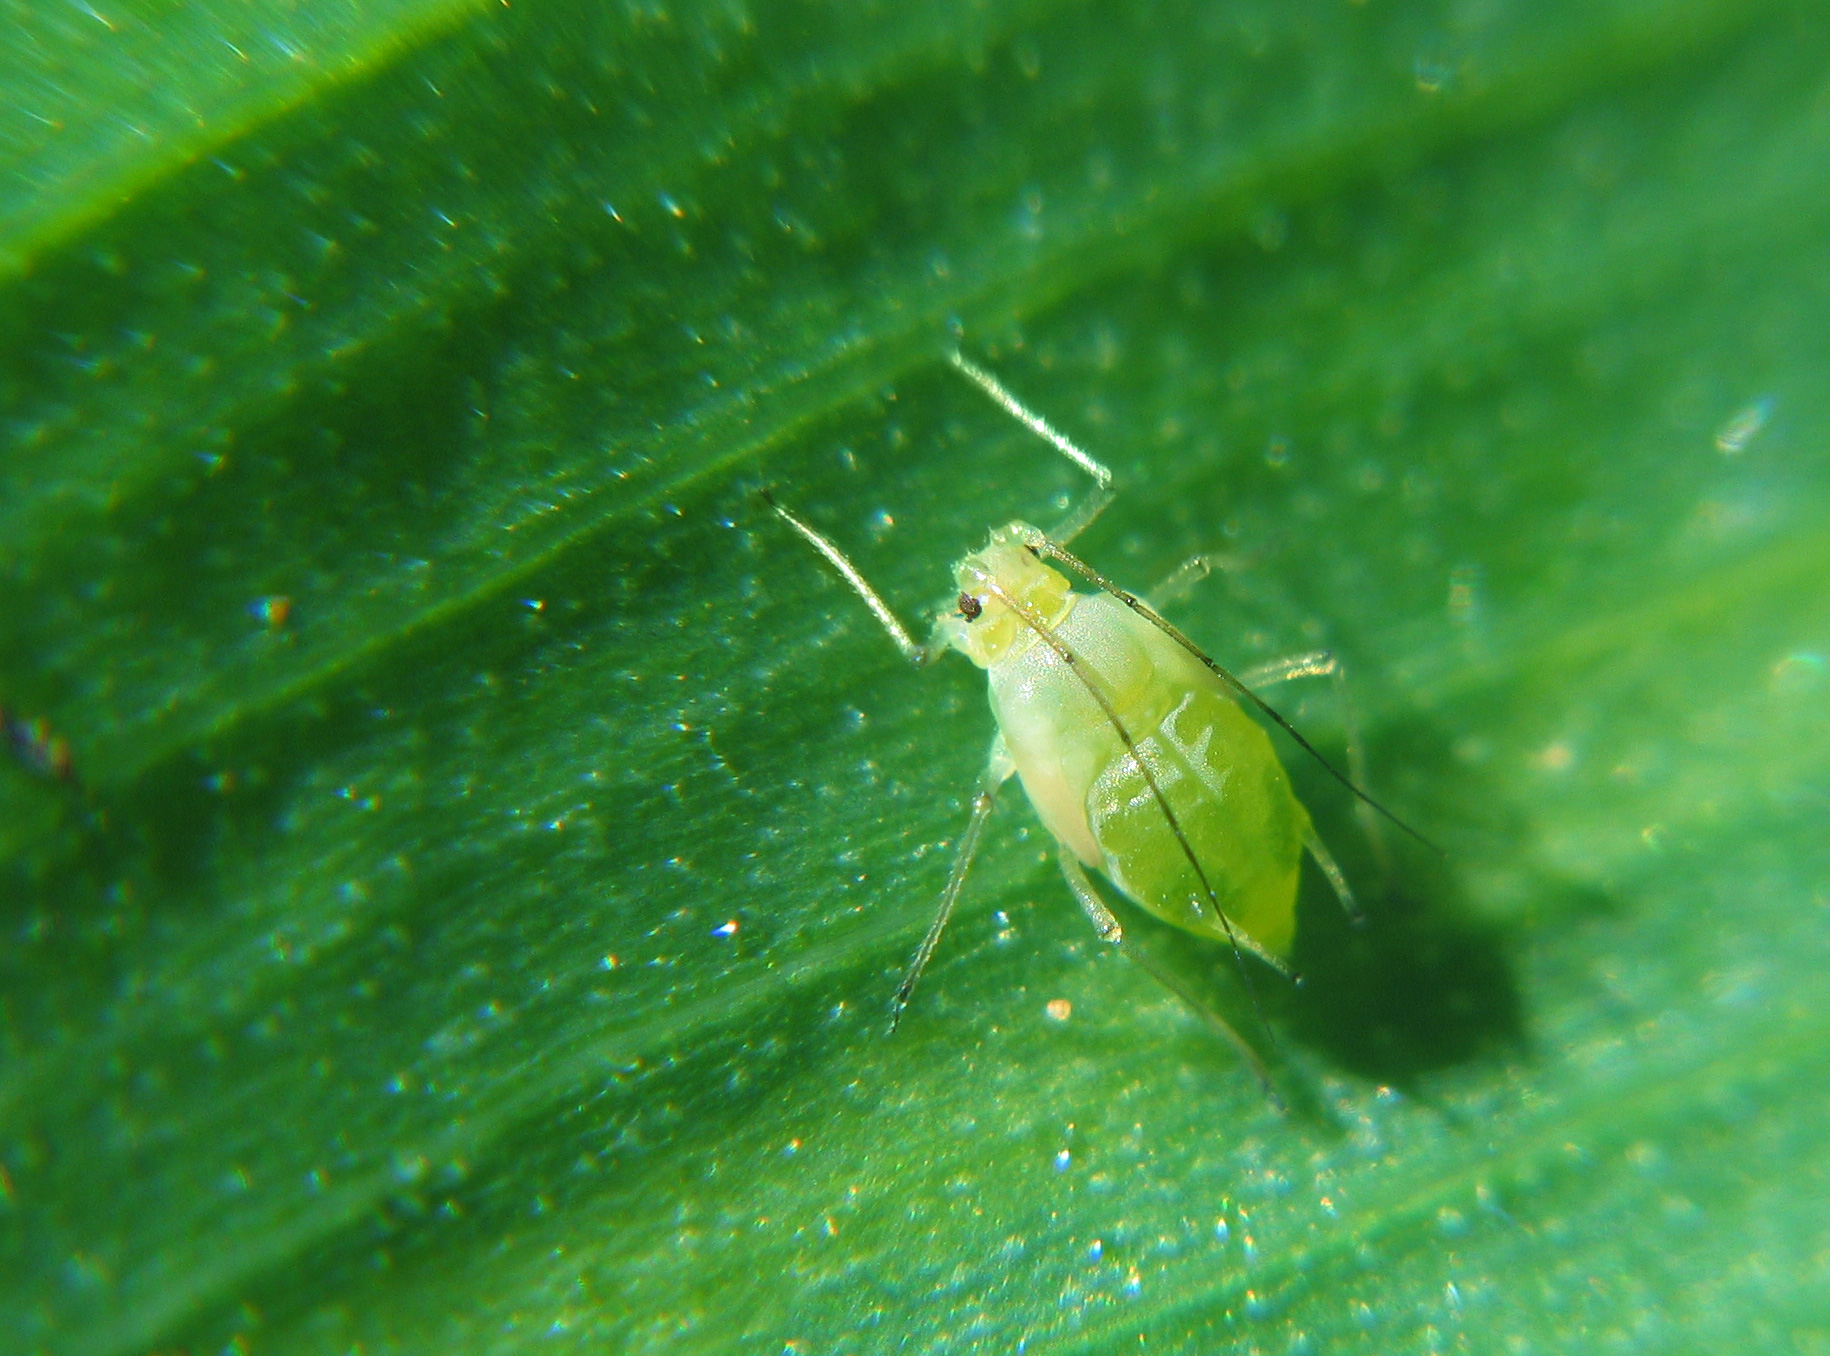 Close view of an aphid on a leaf.